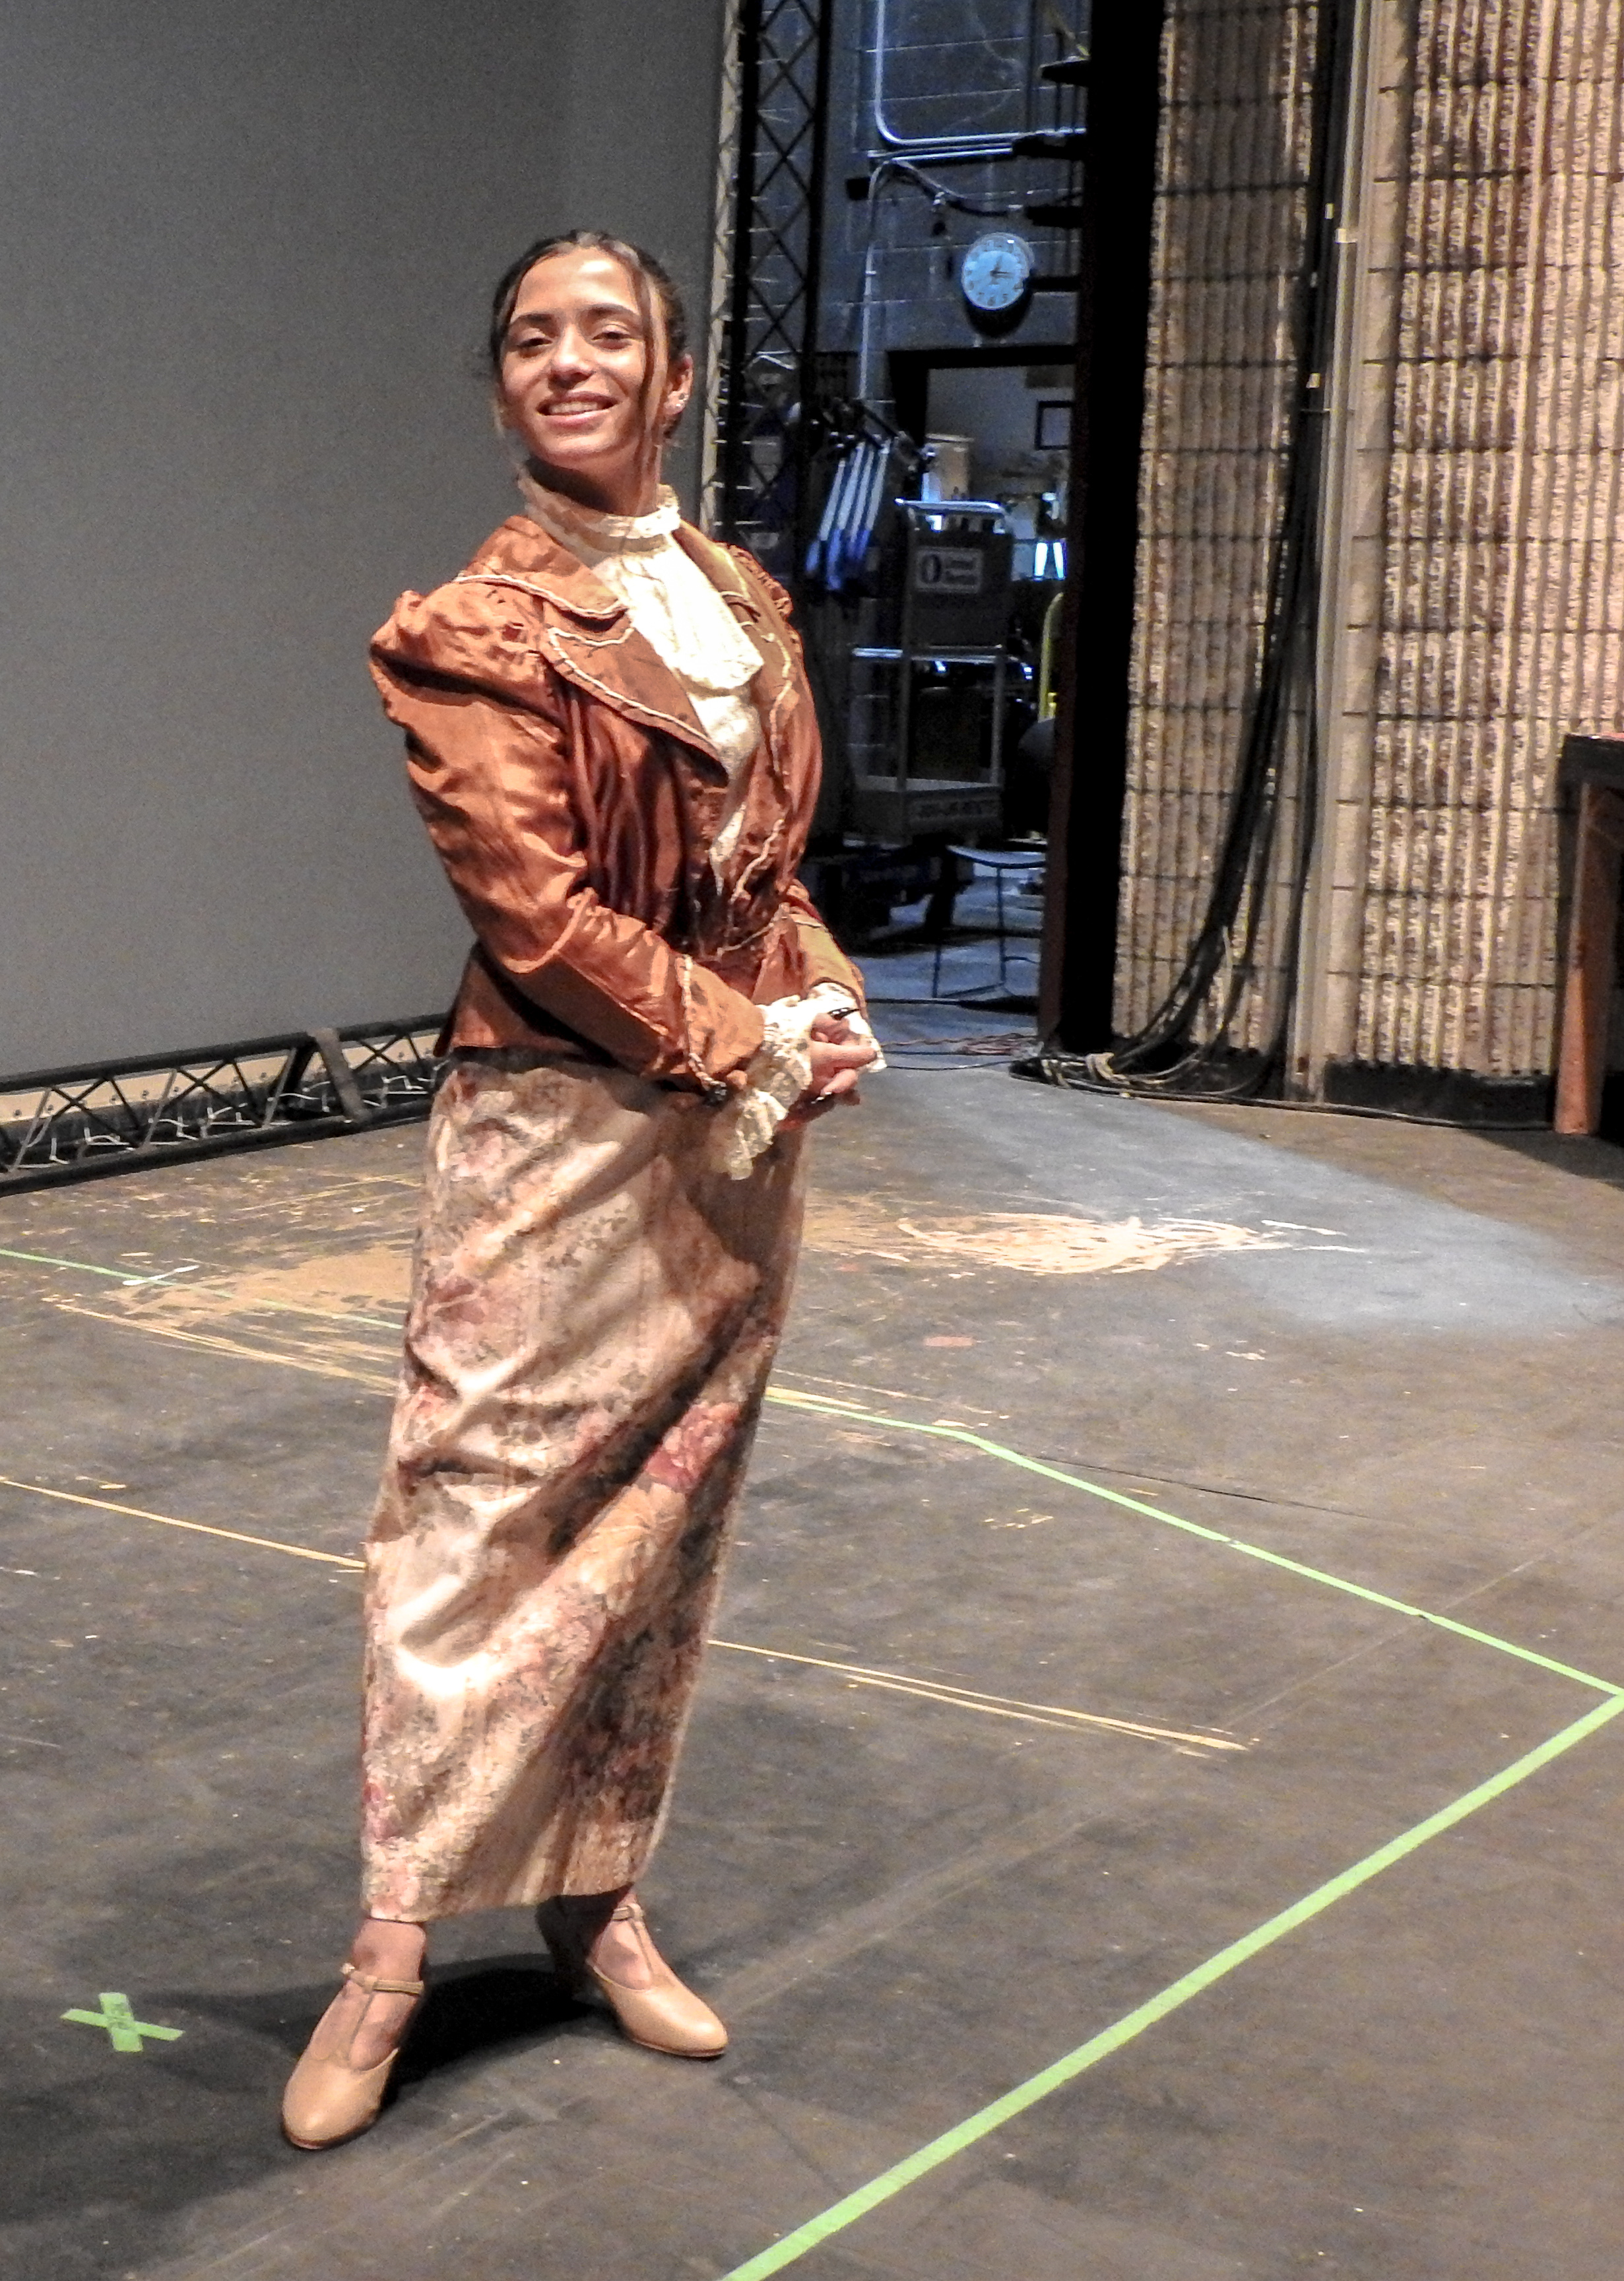 Fallon Makki playing Mrs. Banks in the Henry Ford College production of Mary Poppins